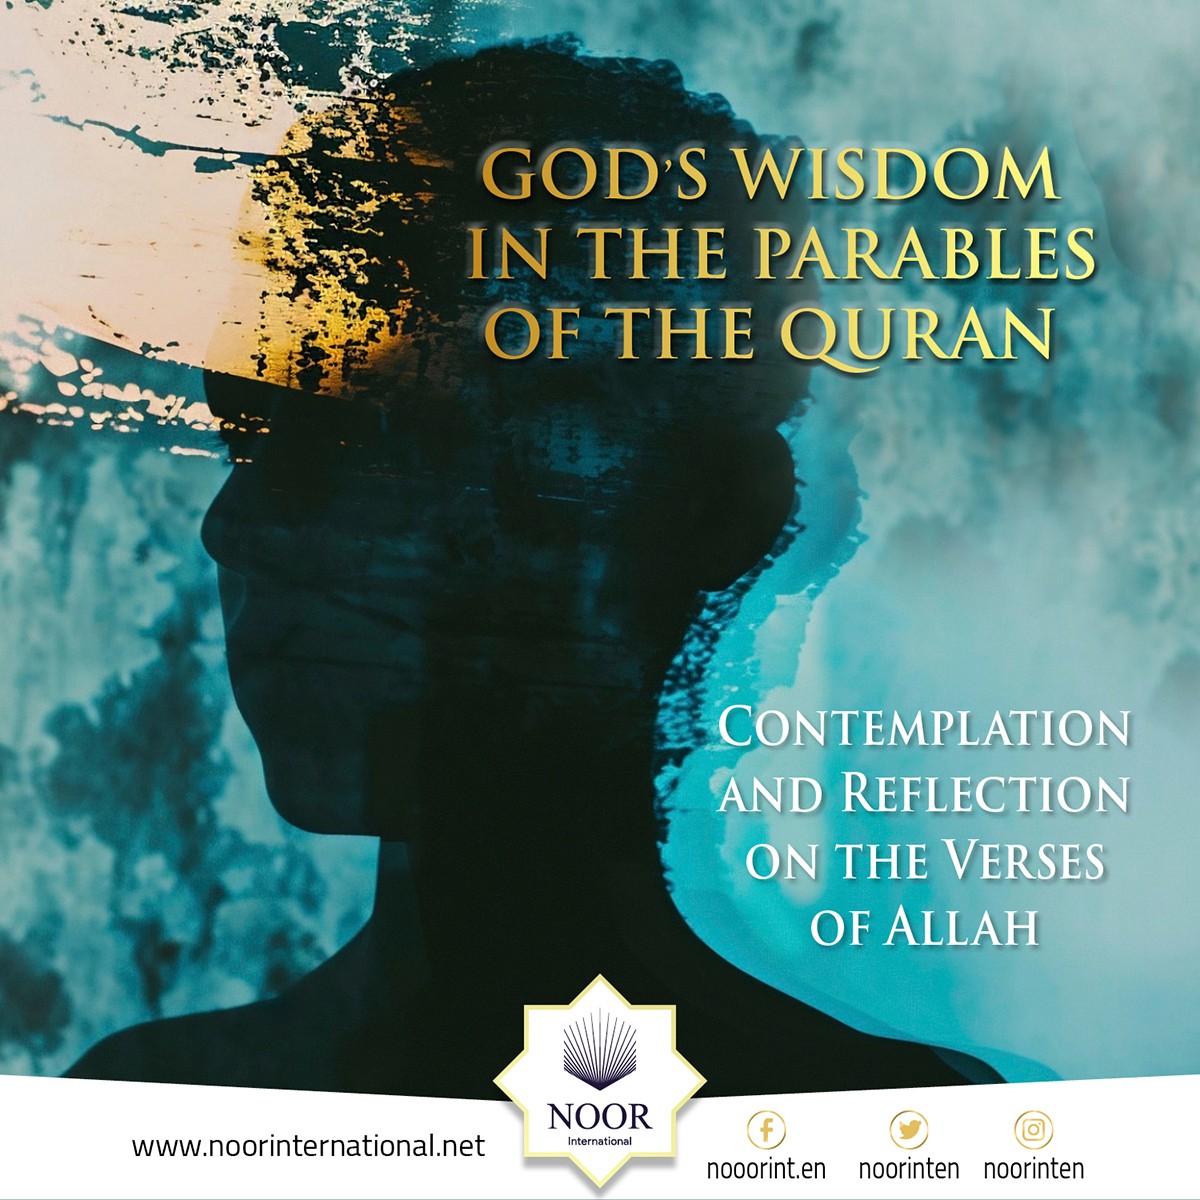 Contemplation and Reflection on the Verses of Allah